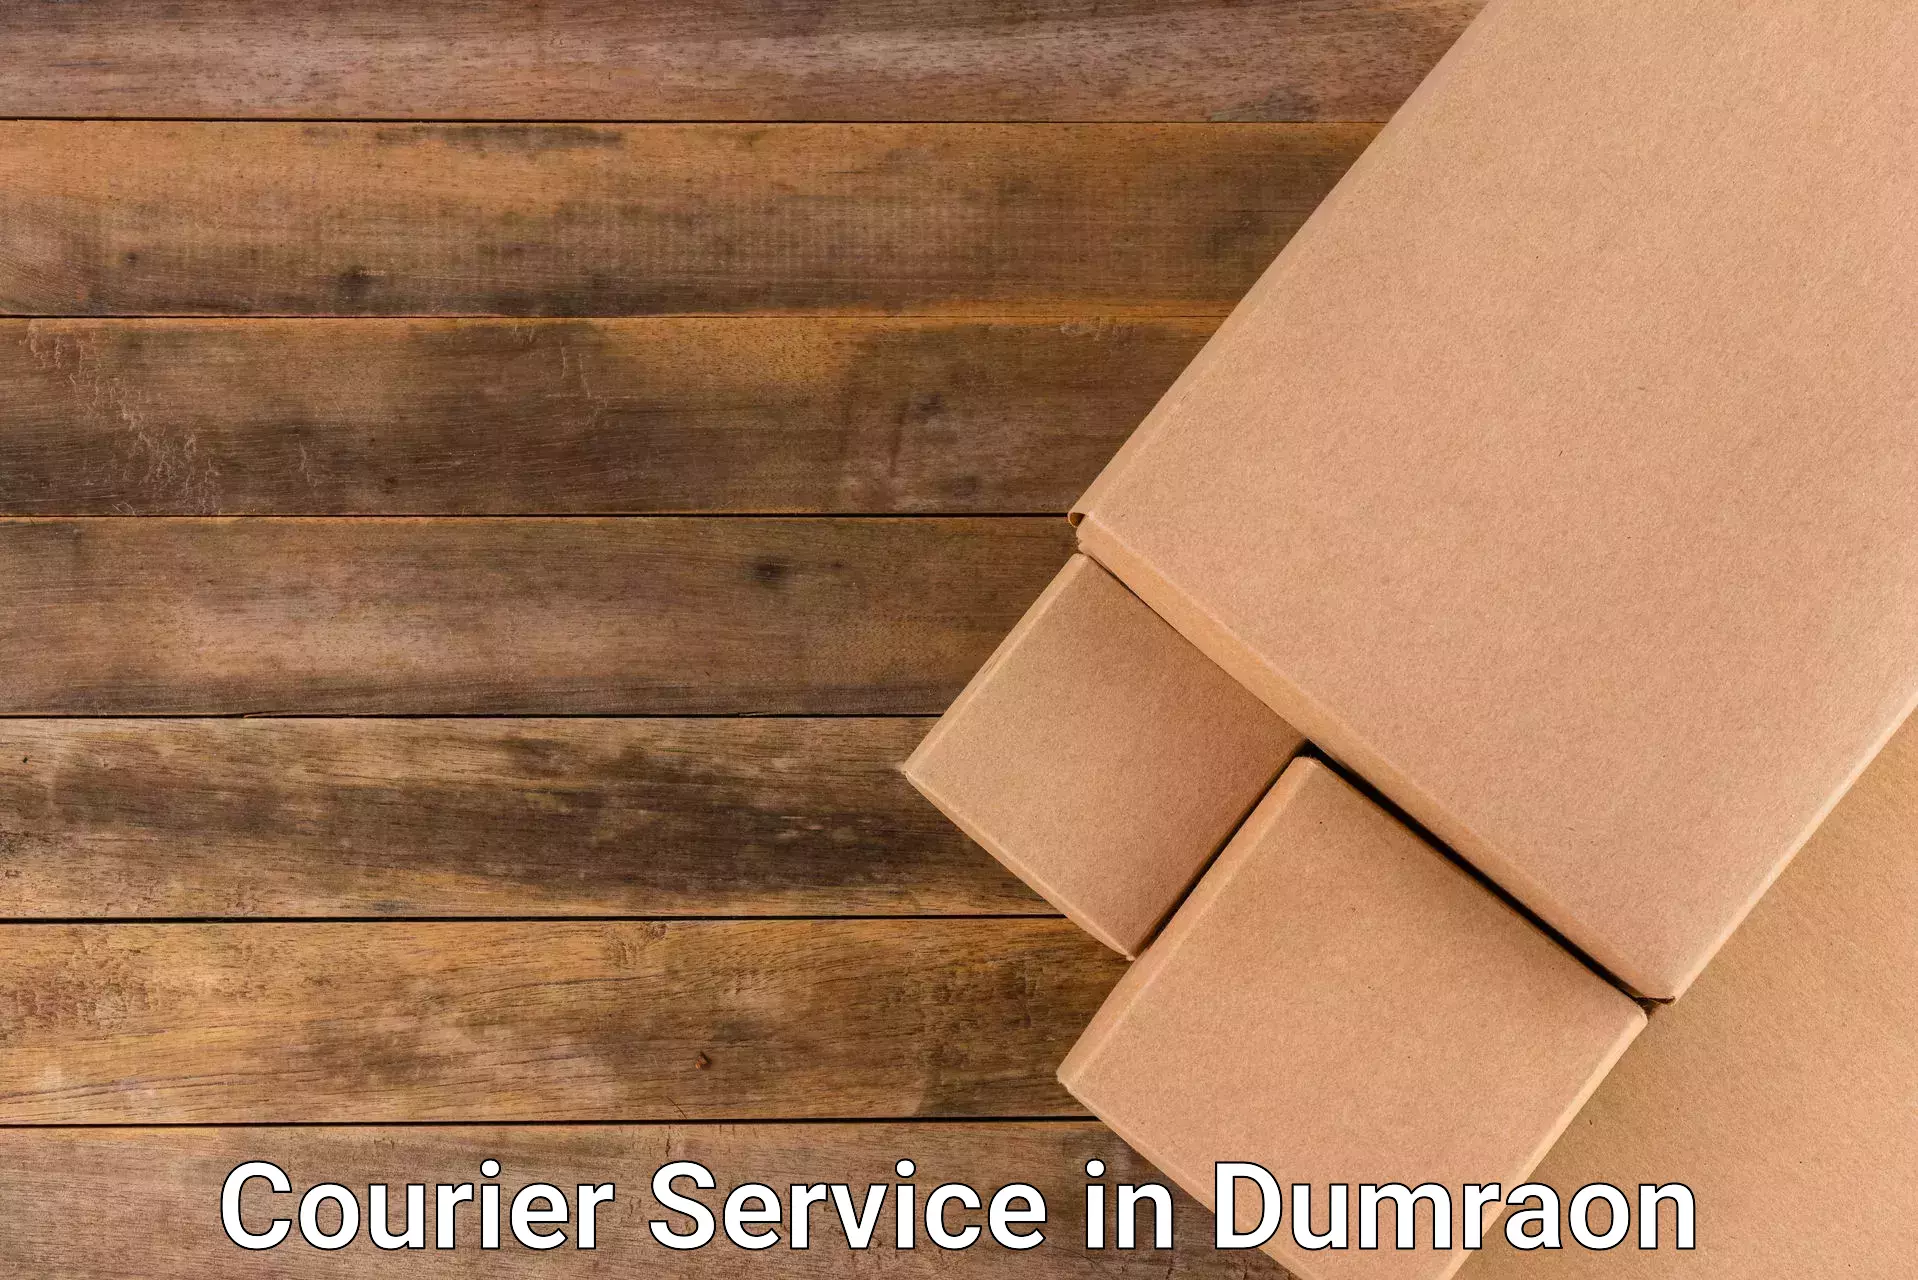 24-hour courier service in Dumraon